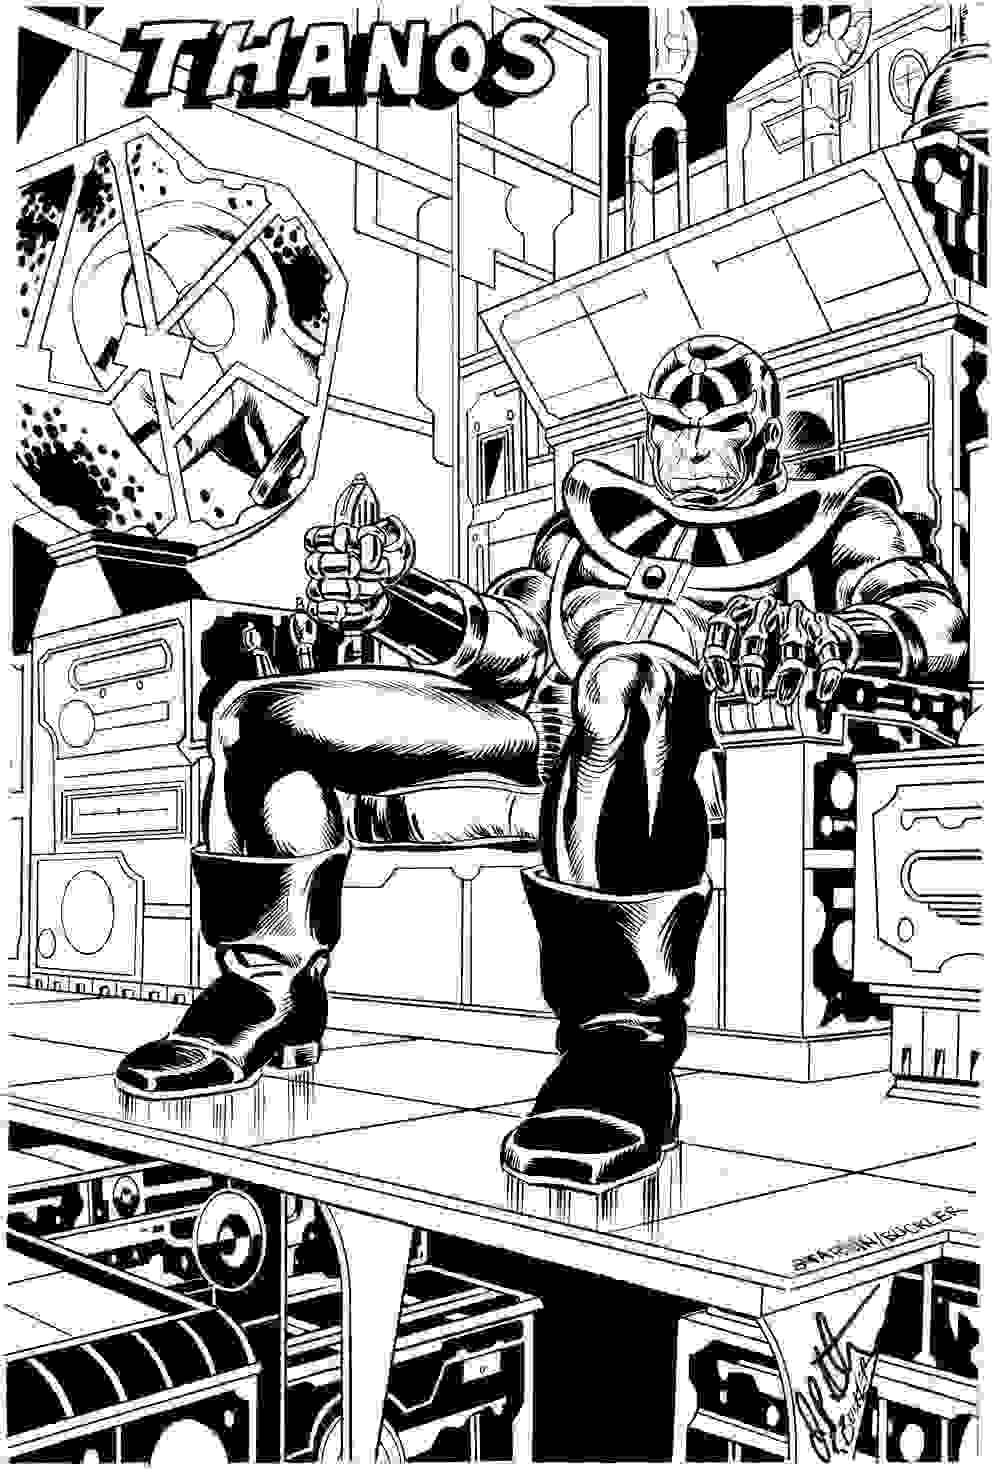 Thanos activated his machine in the Avengers Coloring Page